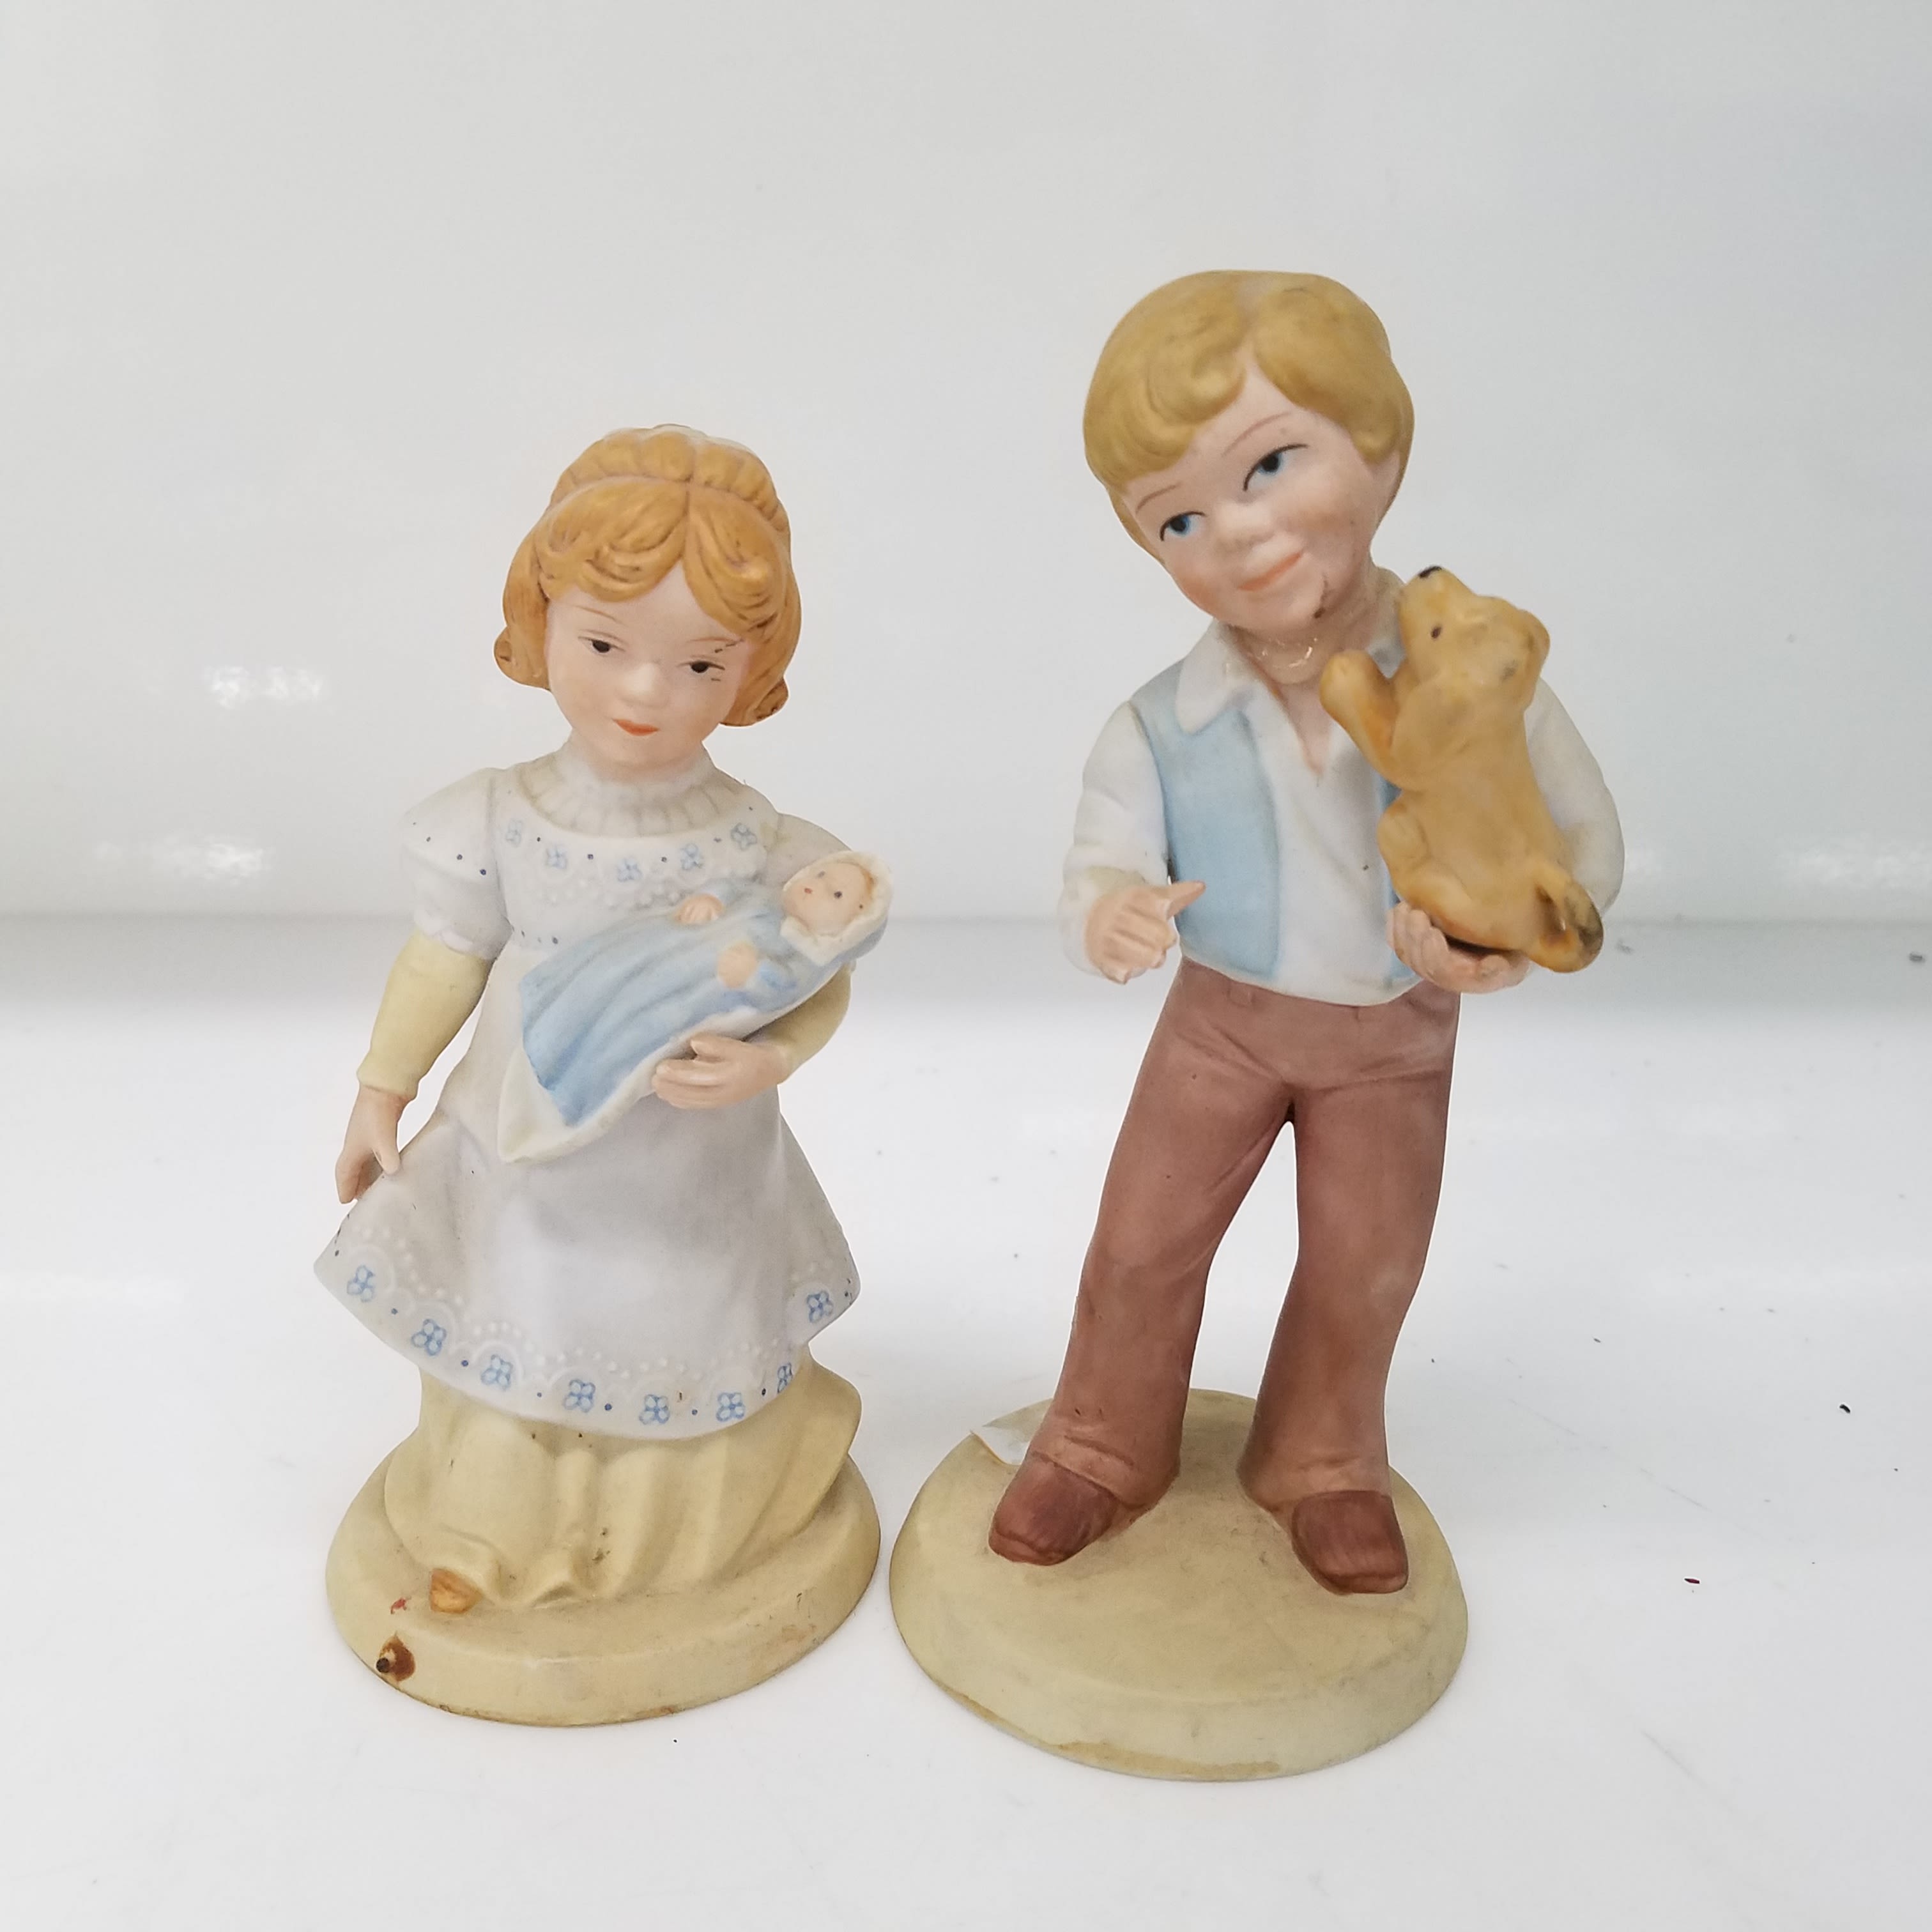 Buy the 2 Avon 1981 Ceramic Figurines Best Friends and A Mothers Love